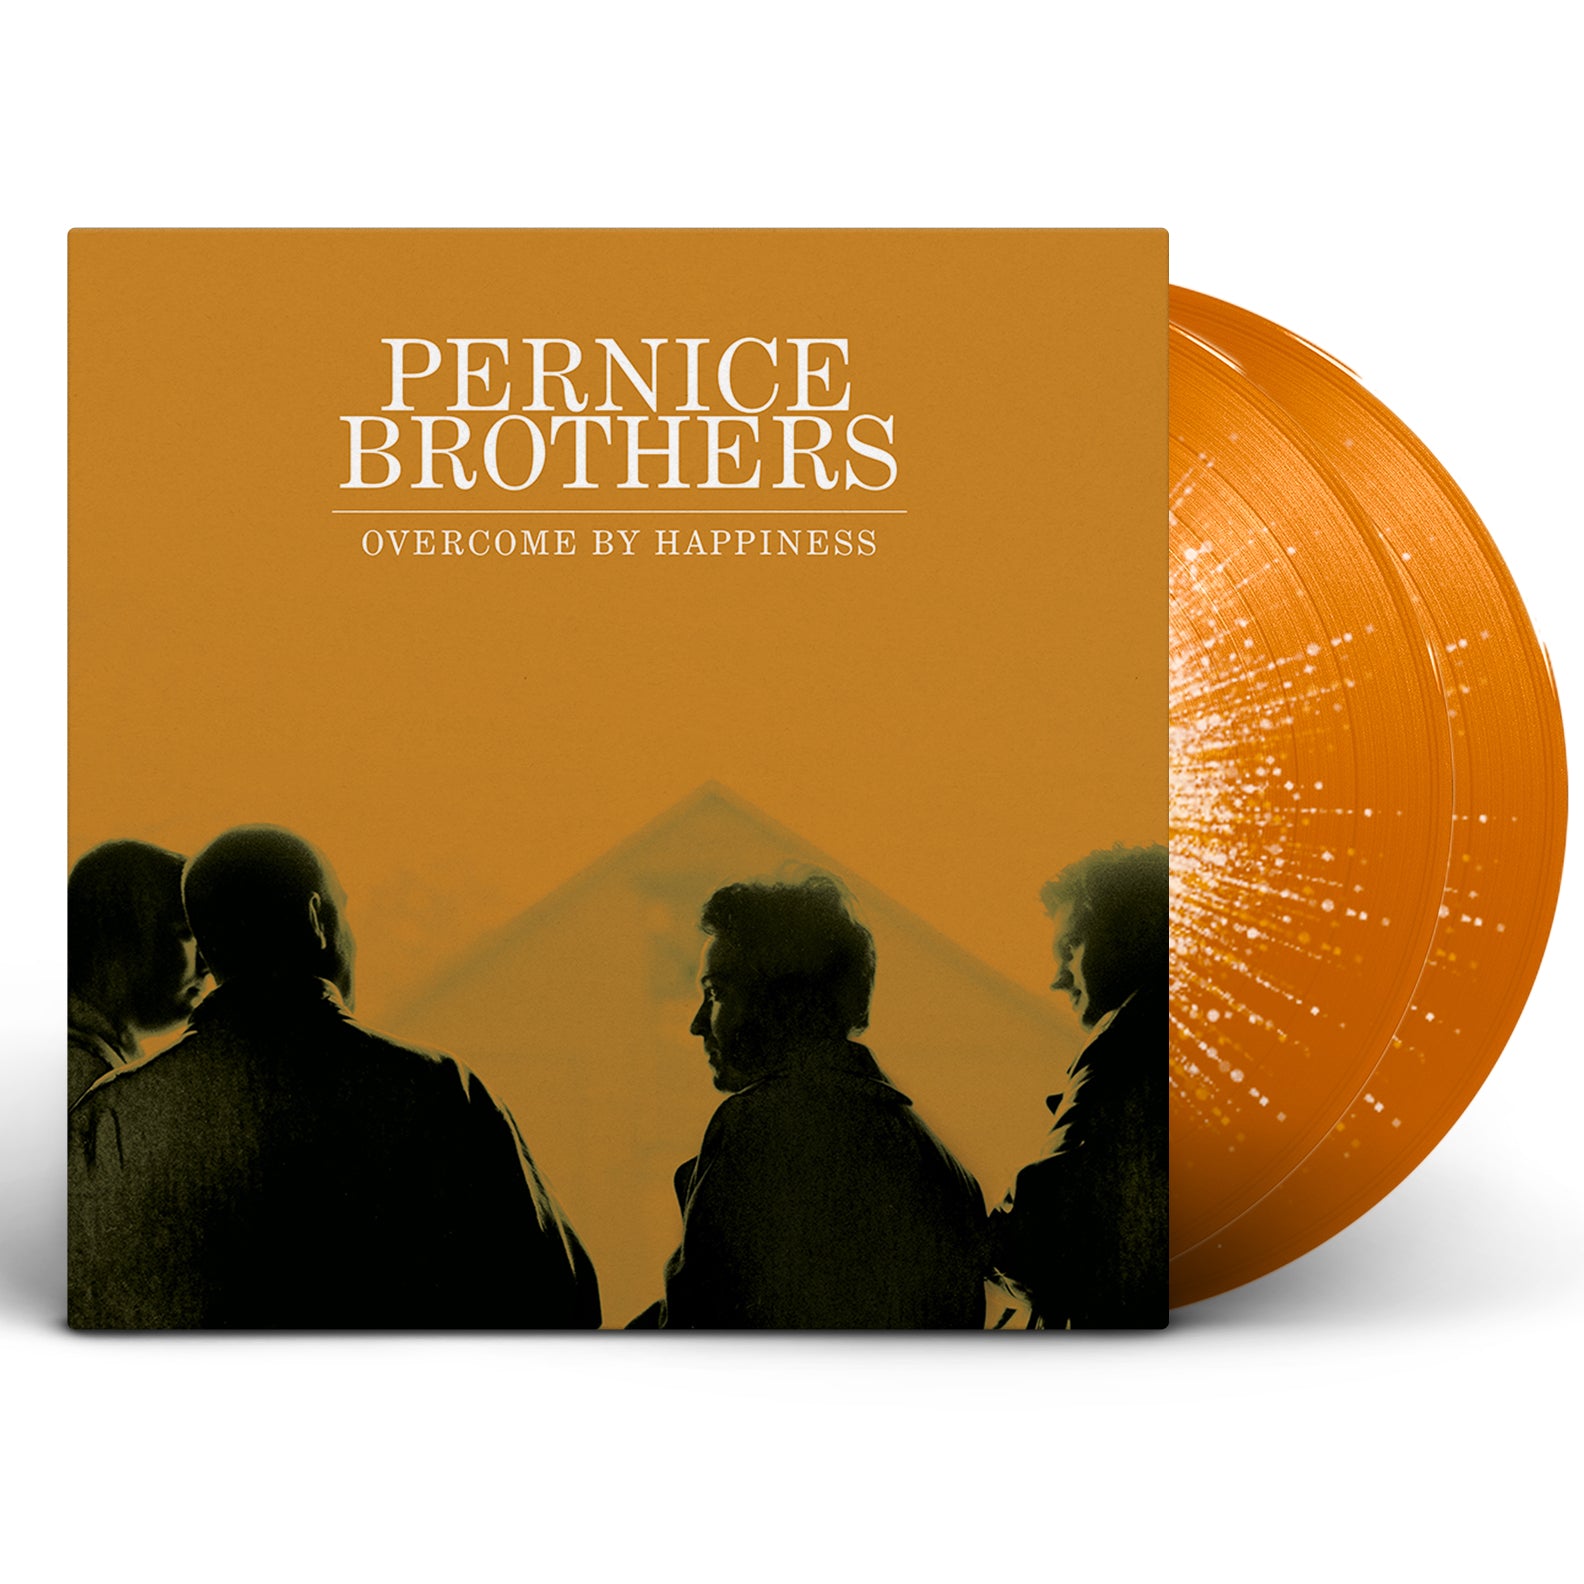 Pernice Brothers - Overcome by Happiness (25th Anniversary Edition) [SIGNED Deluxe Color Vinyl]